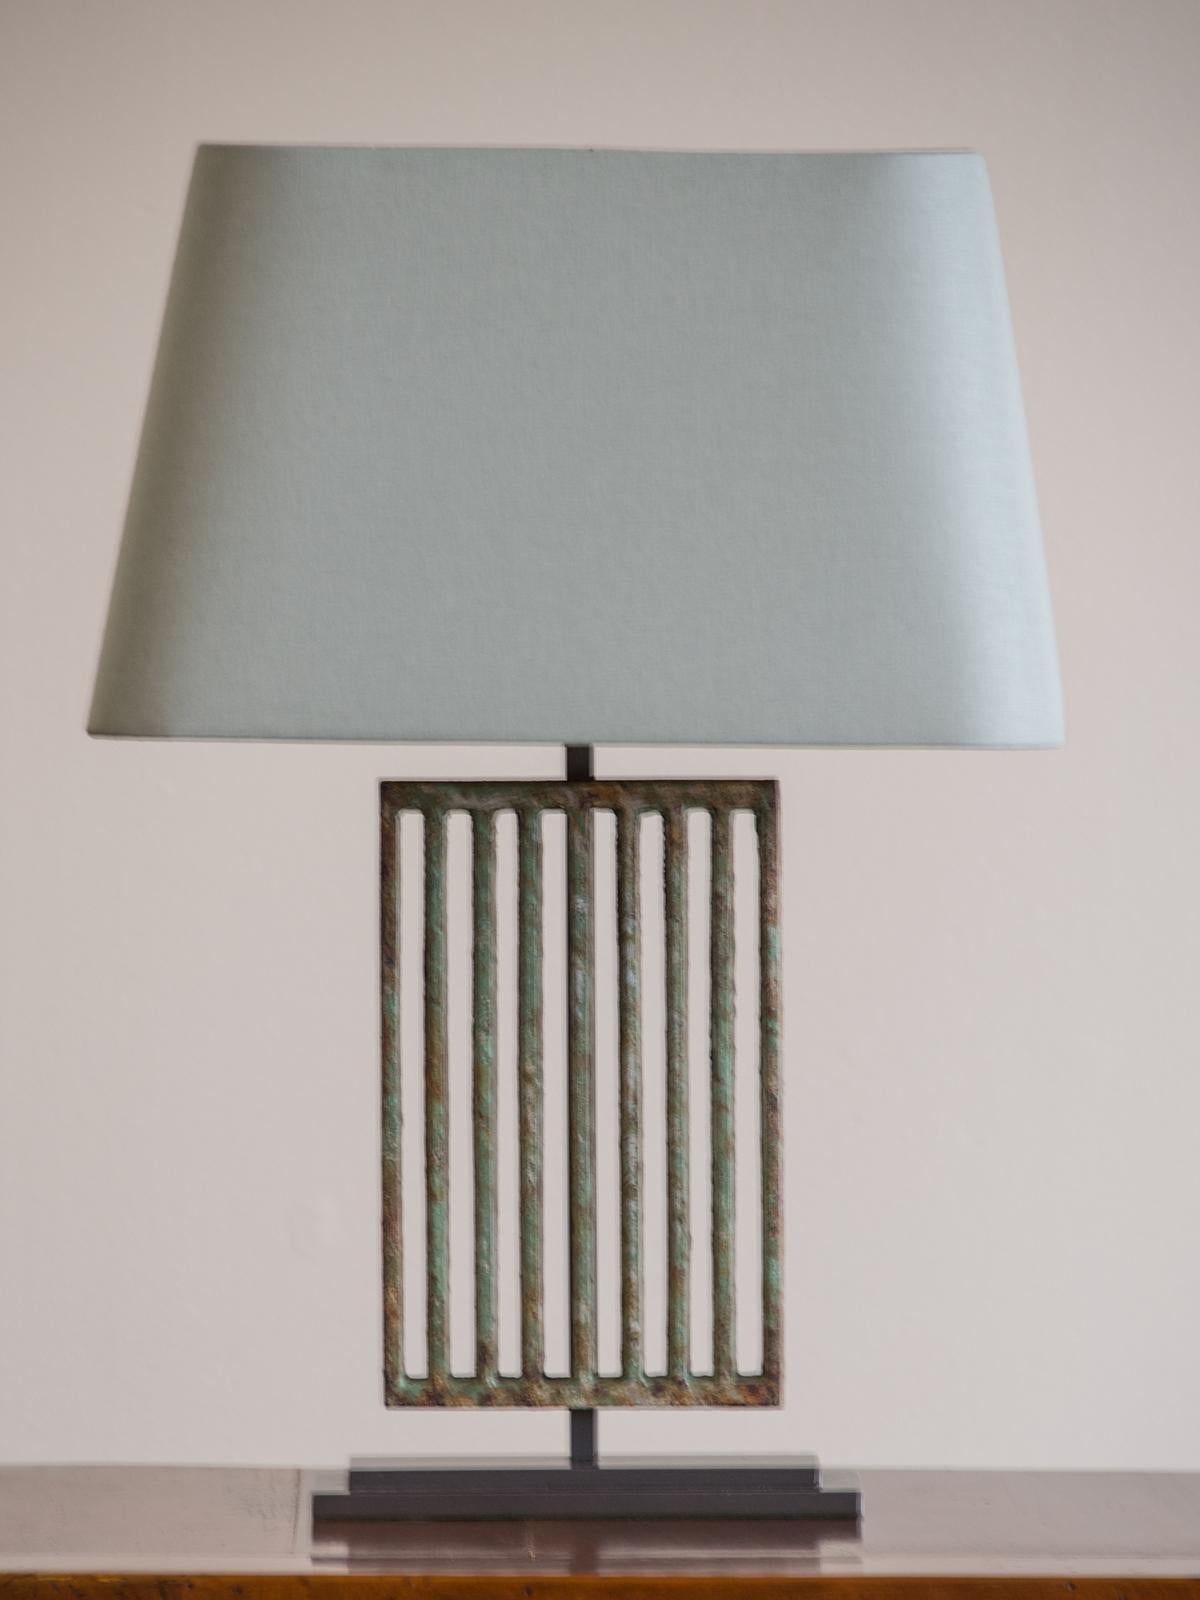 A pair of Art Deco period solid cast iron vintage French grille painted lamps from France, circa 1930 retaining their original painted finish now mounted as custom lamps on a solid steel rectangular stepped base. These lamps possess a marvellous